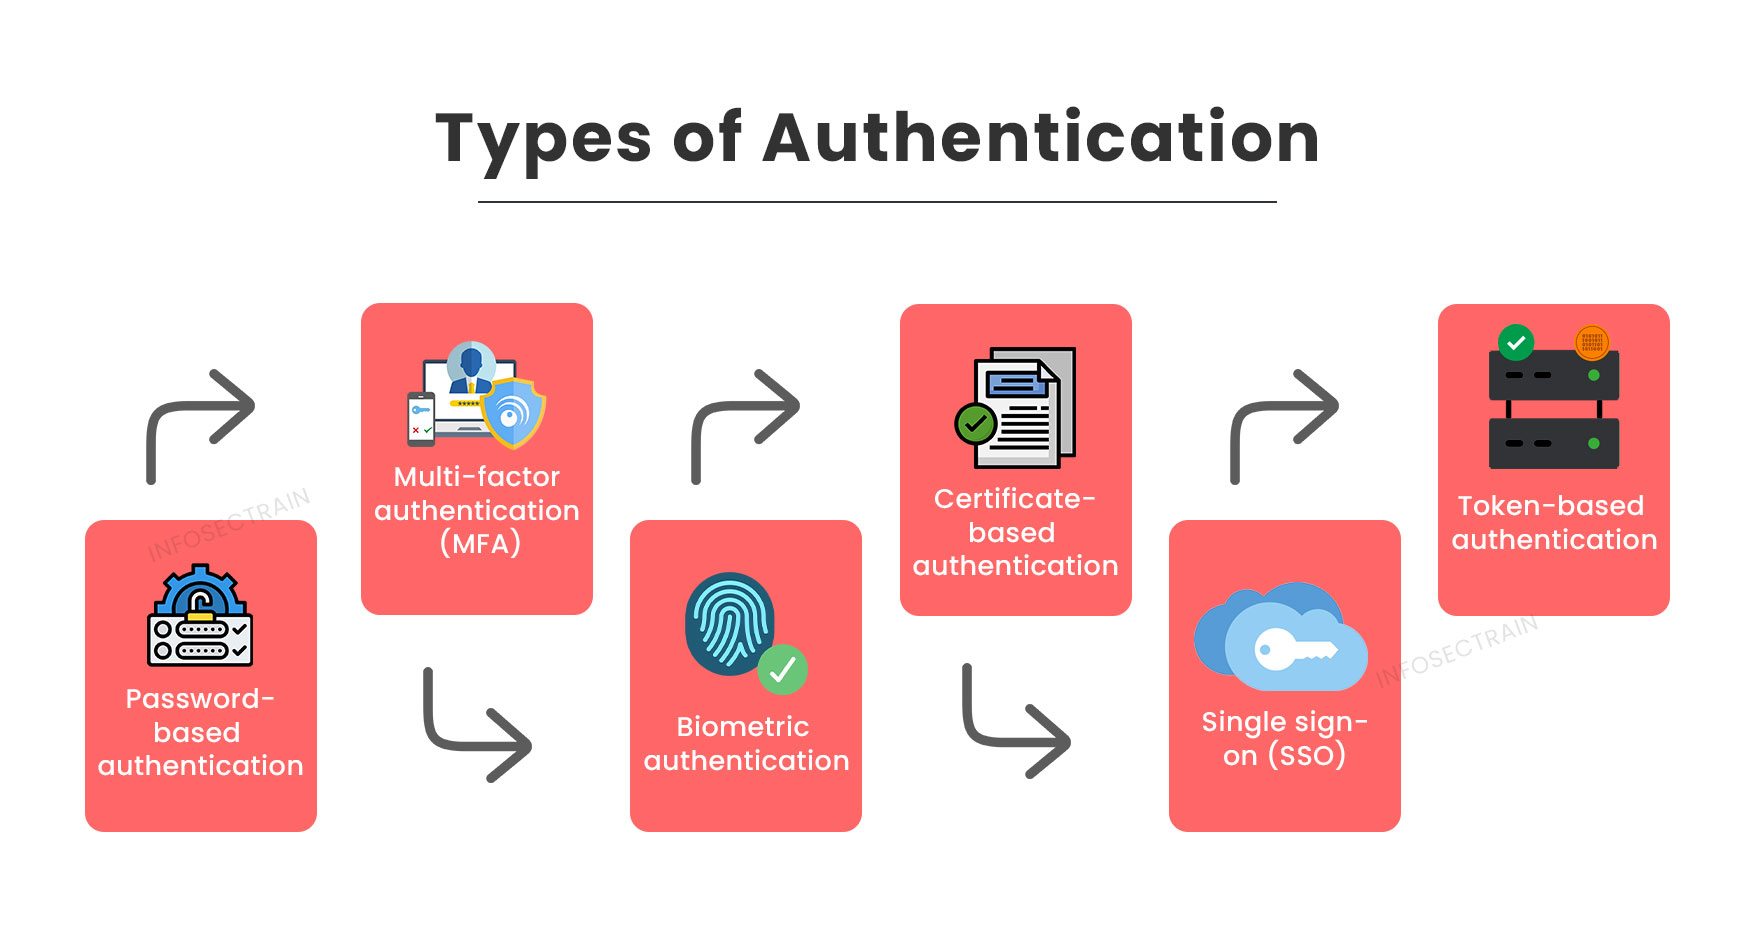 Types of Authentication